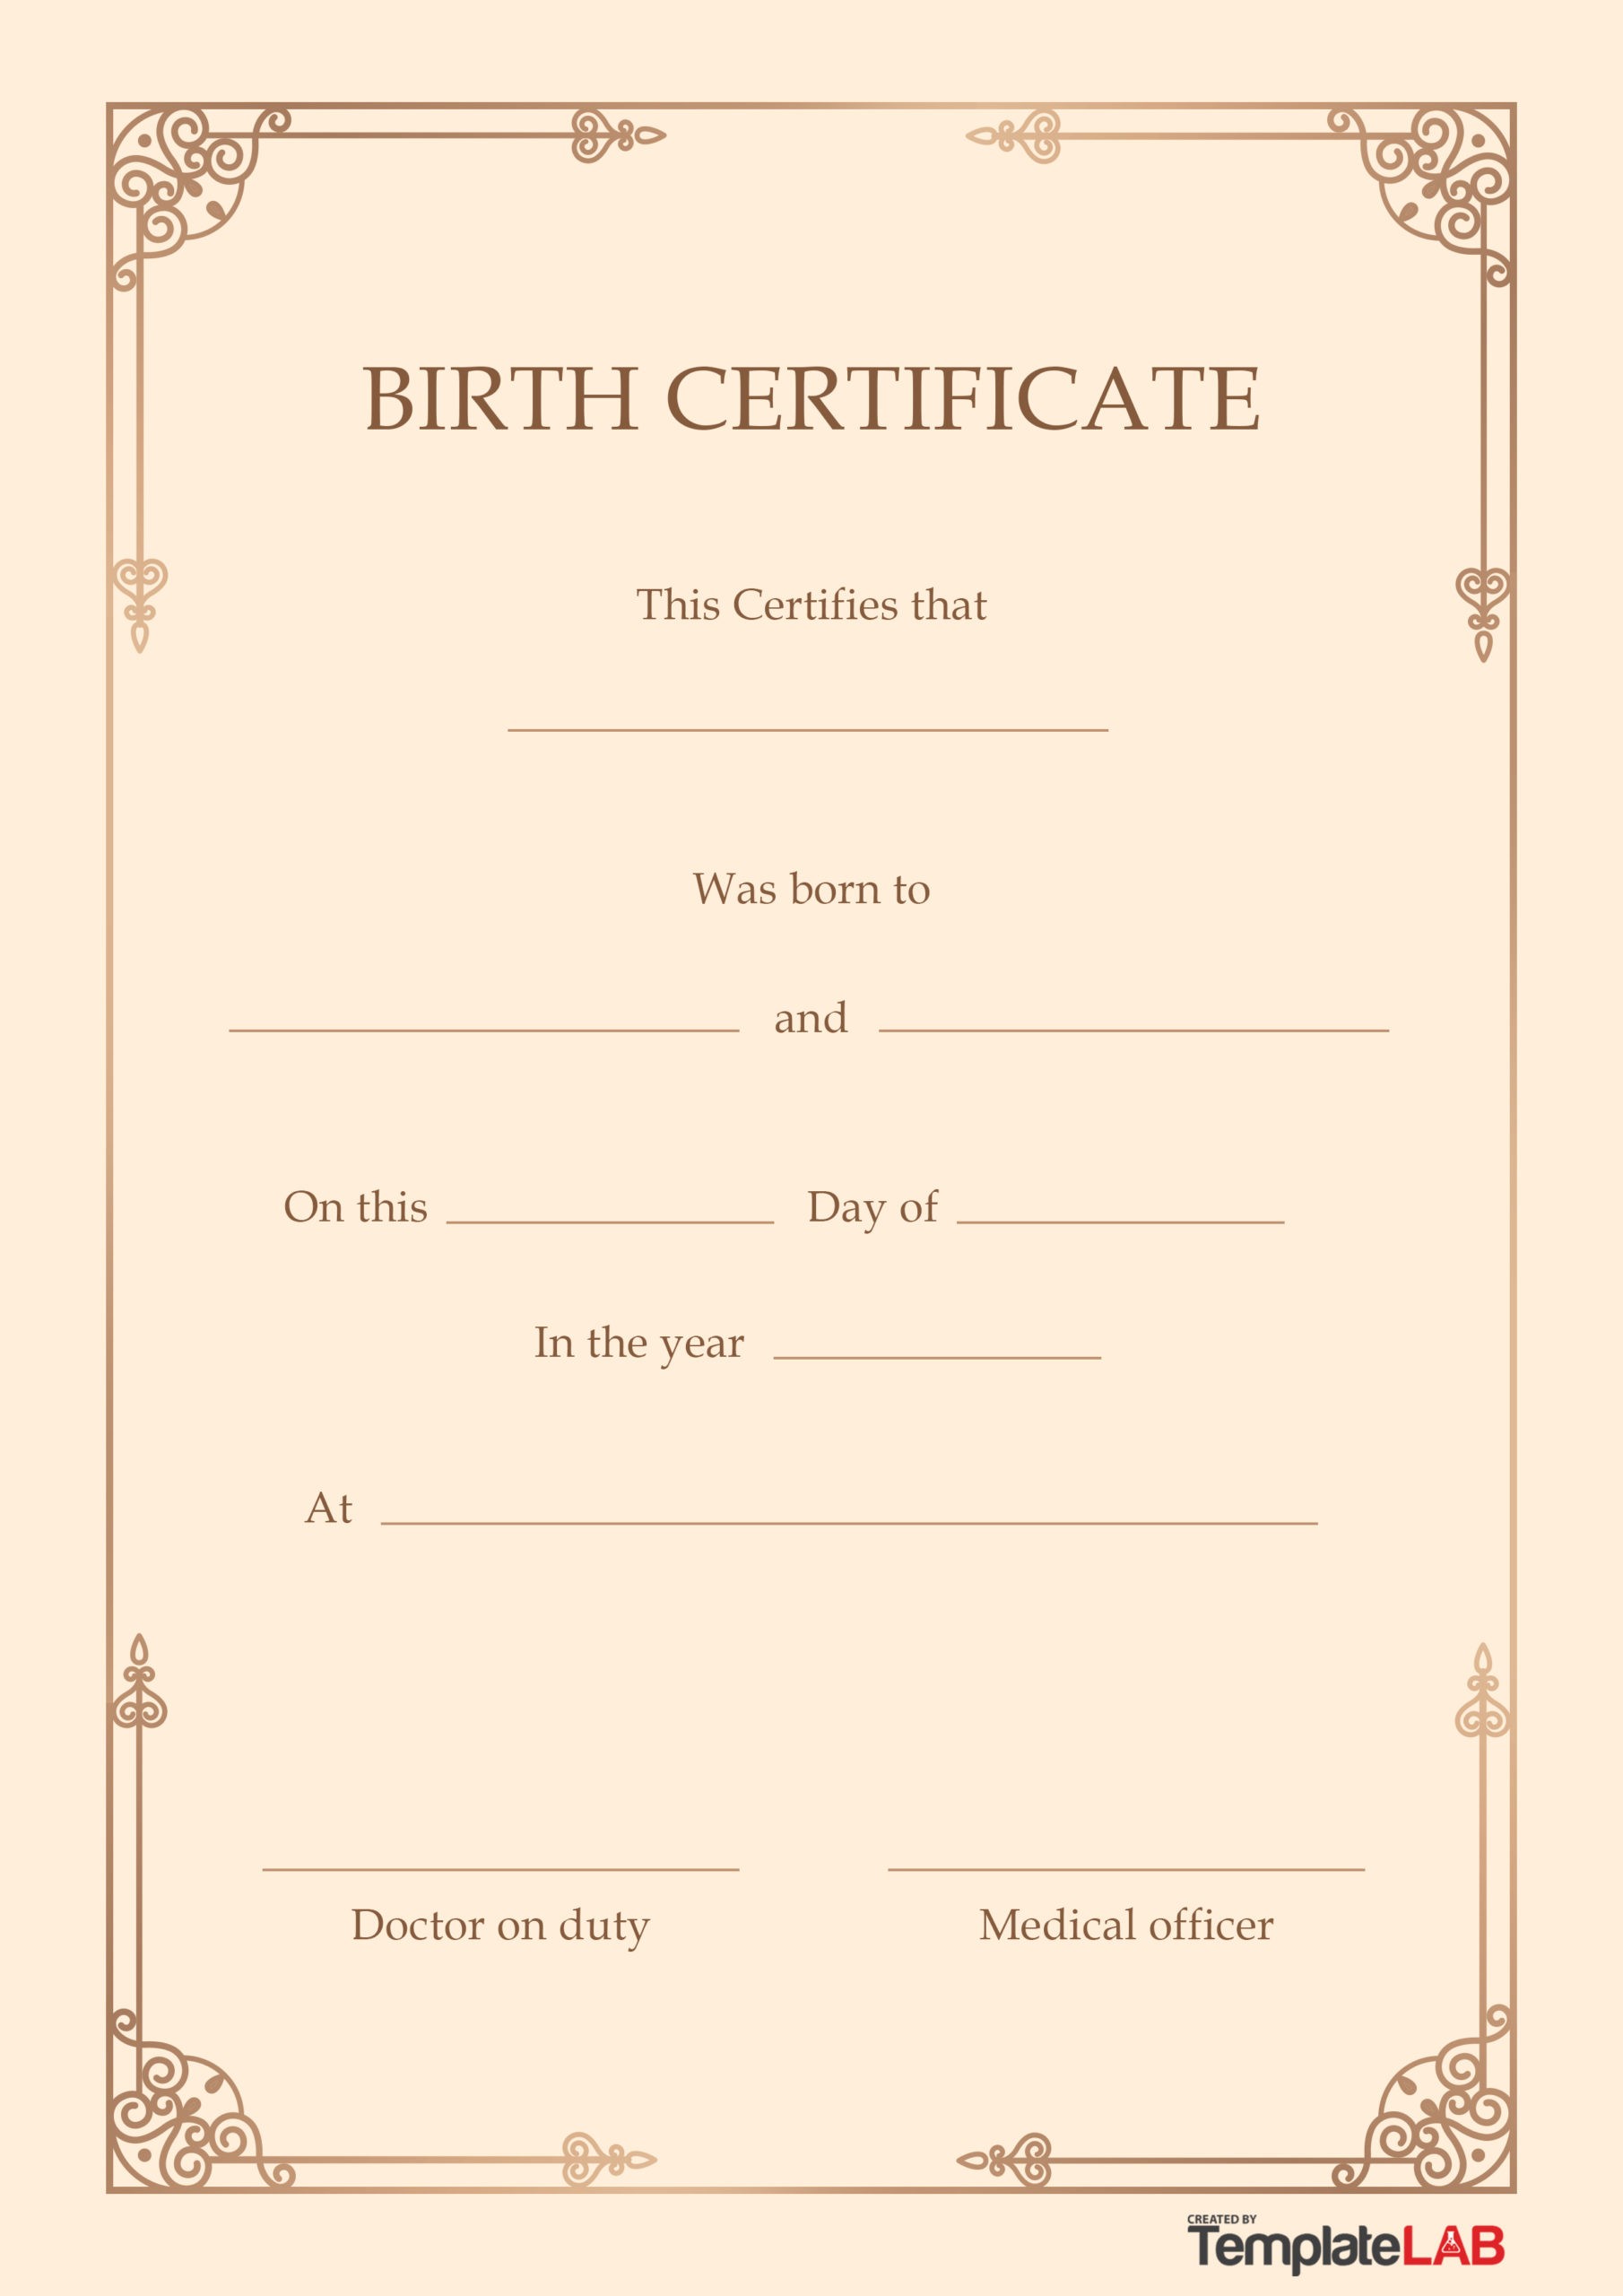 Warning Invest Cut off 27 Birth Certificate Templates (Word, PPT & PDF) ᐅ TemplateLab